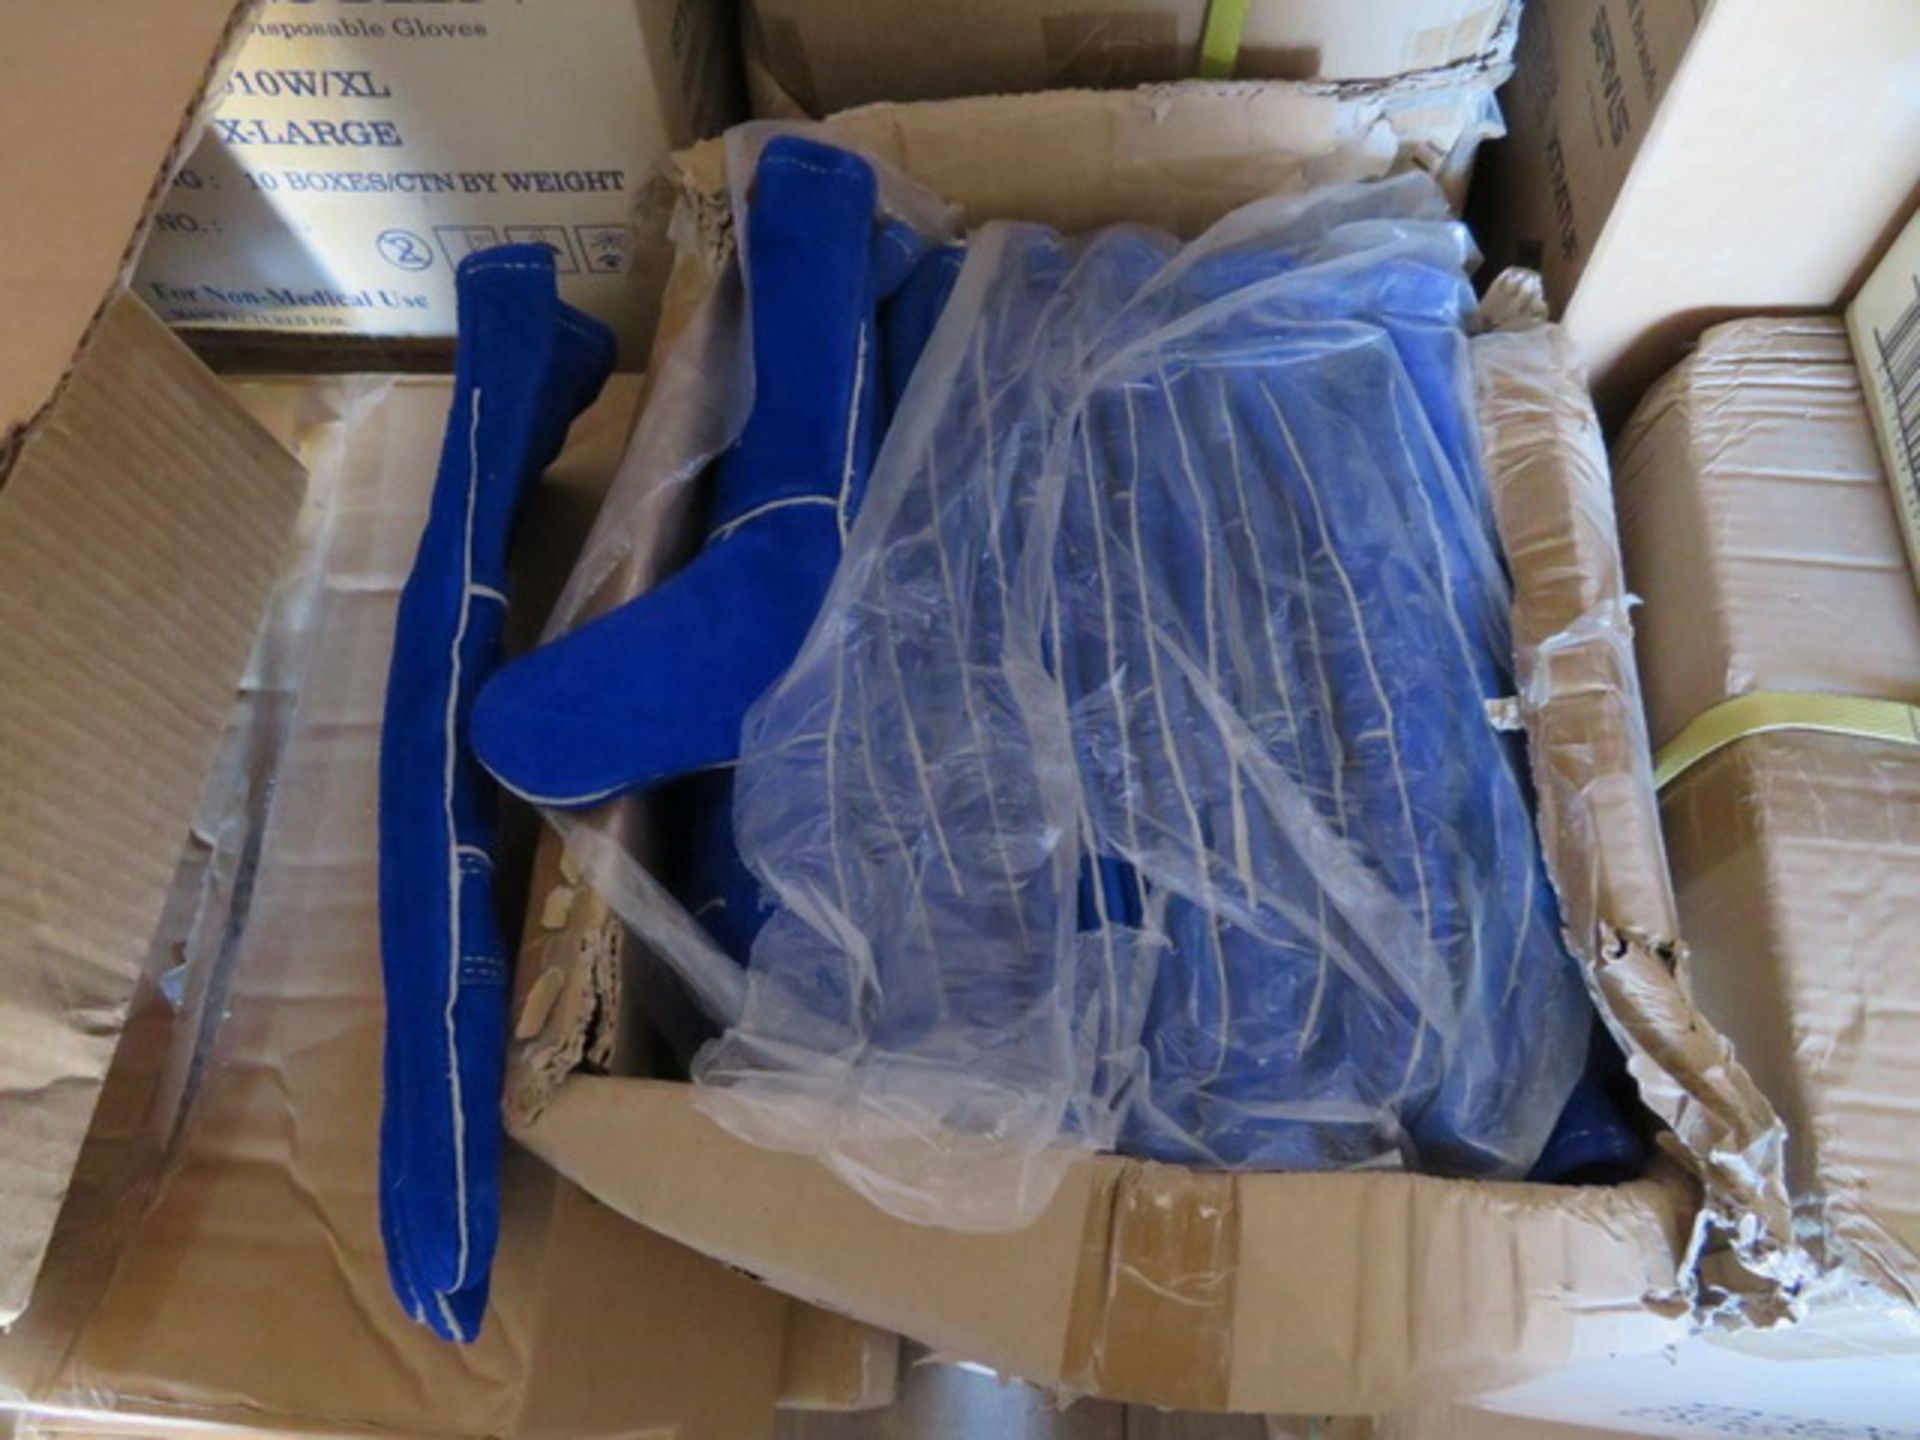 Contents of Shipping Container. To Include 1/2" PVDF Tubing, Safety Glasses, Safety Signs, - Image 32 of 51